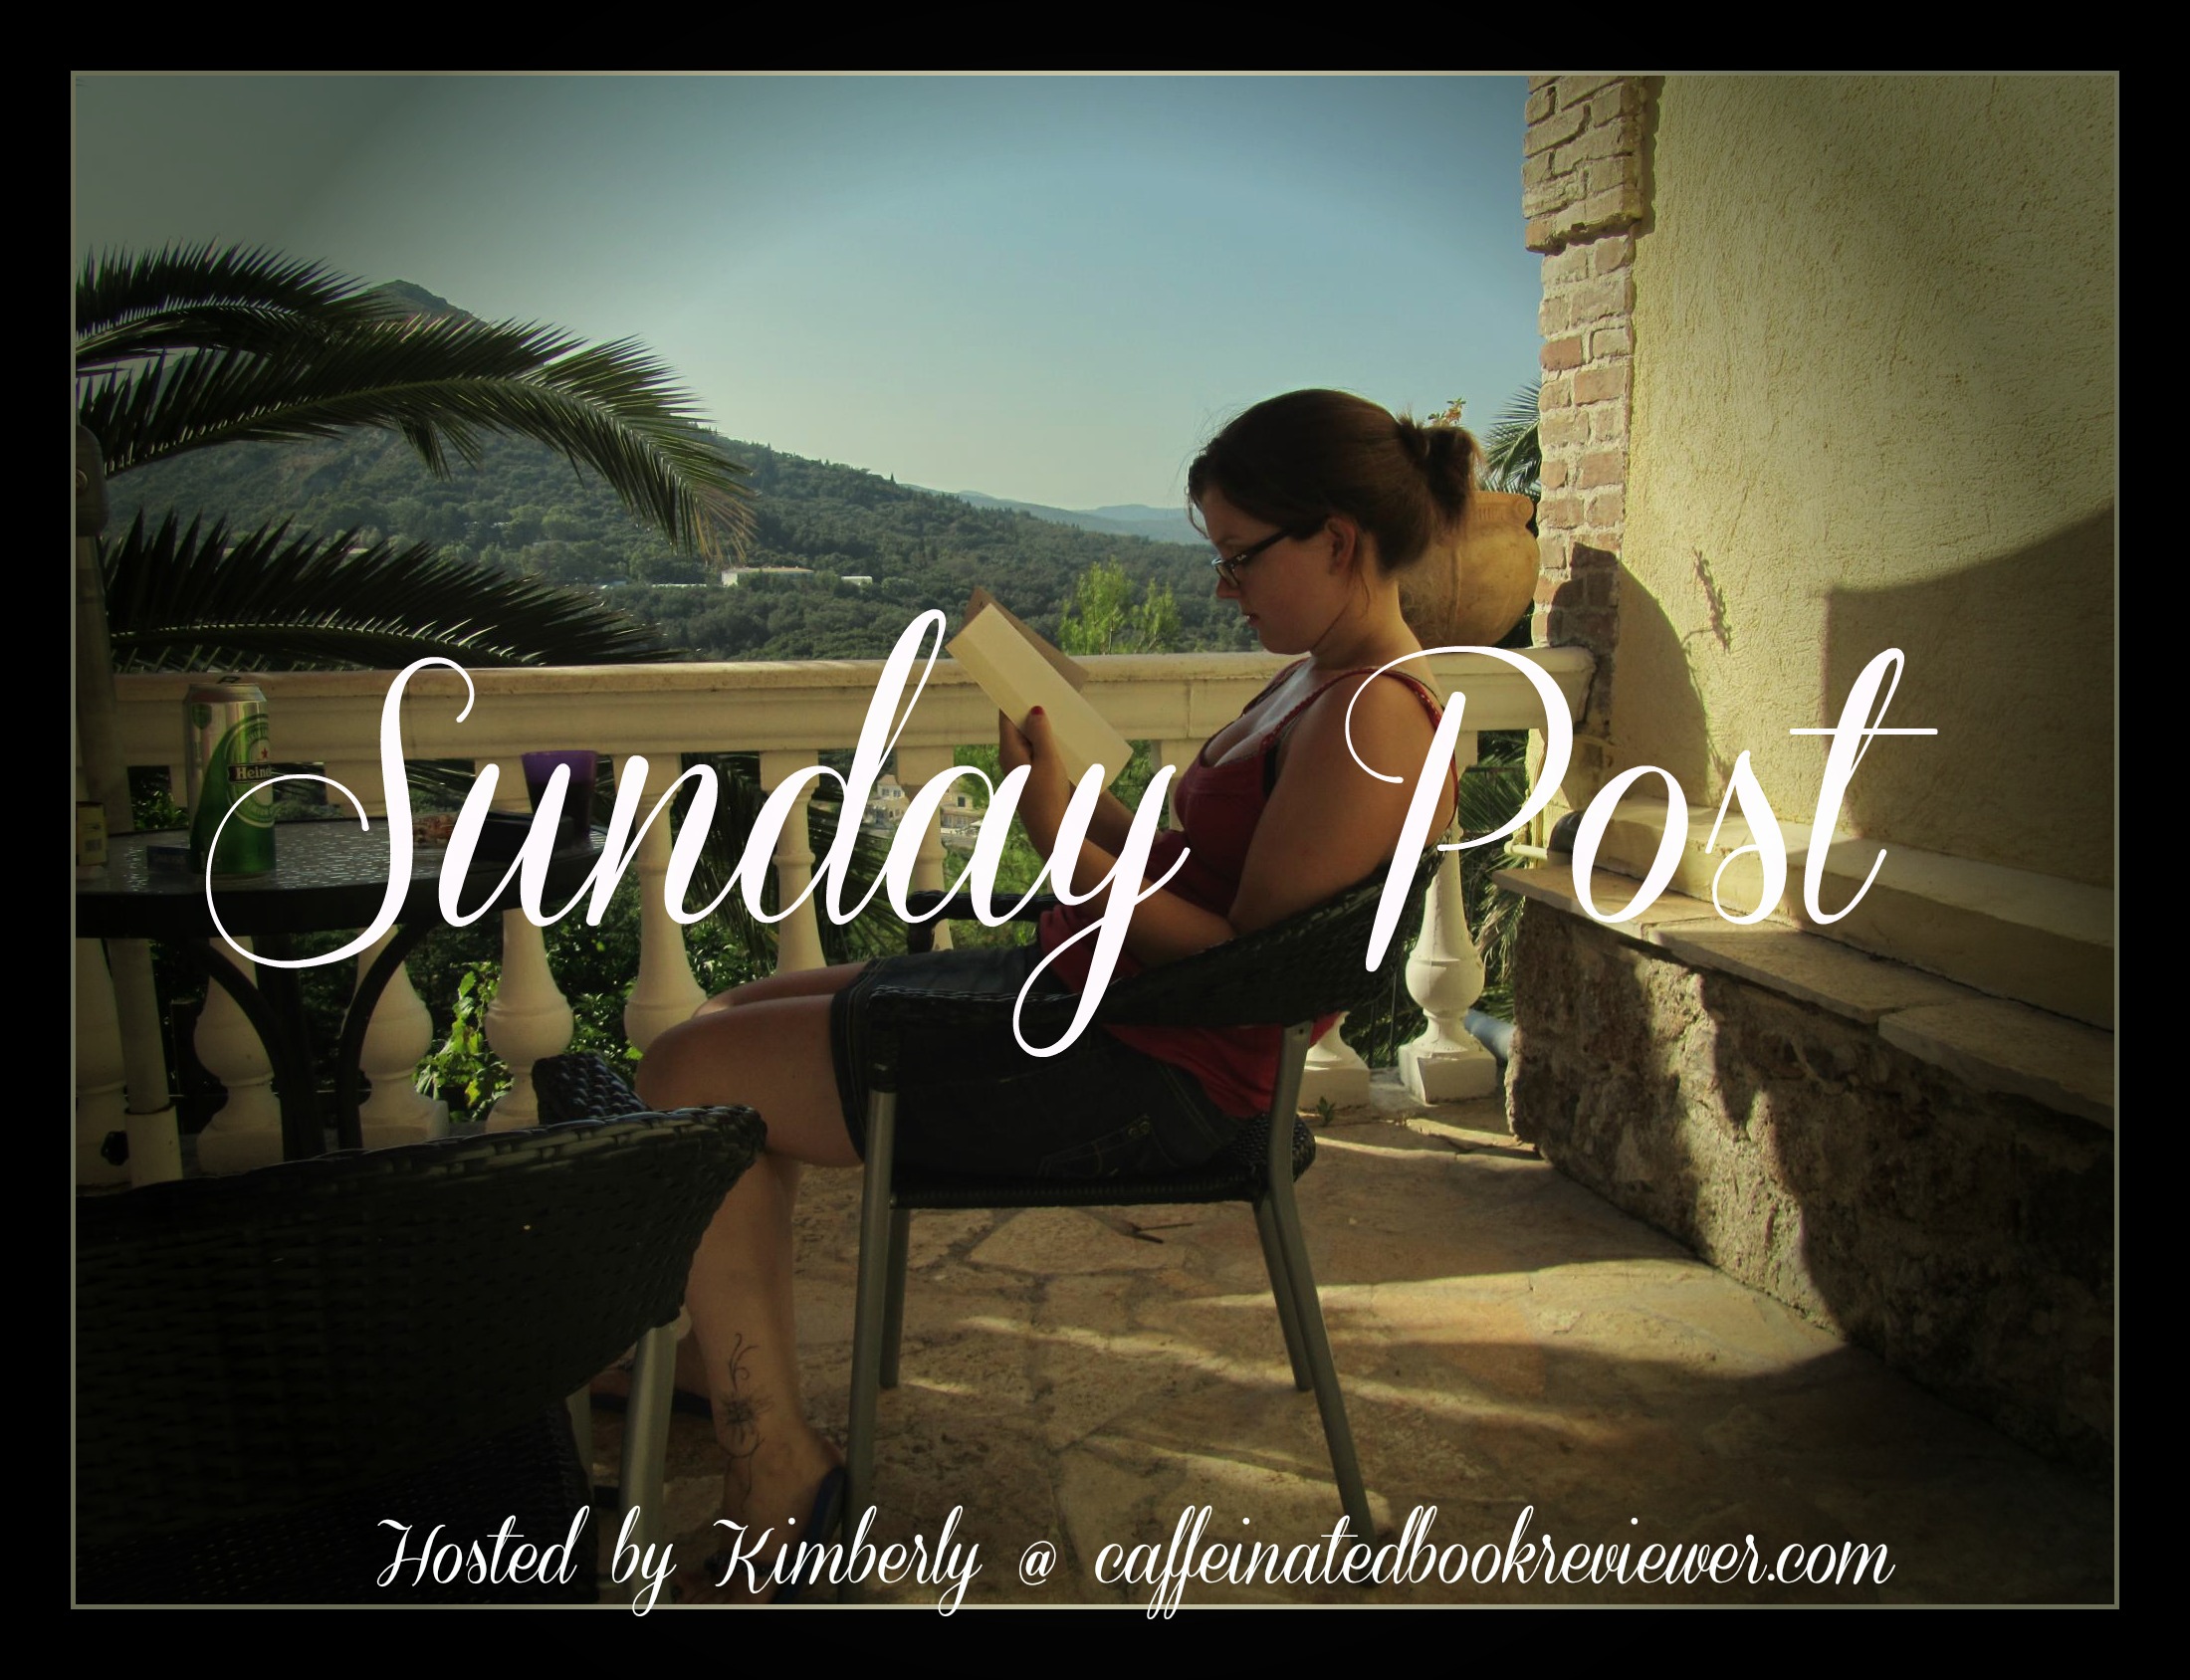 Sunday Post #217: Roller-Coasters